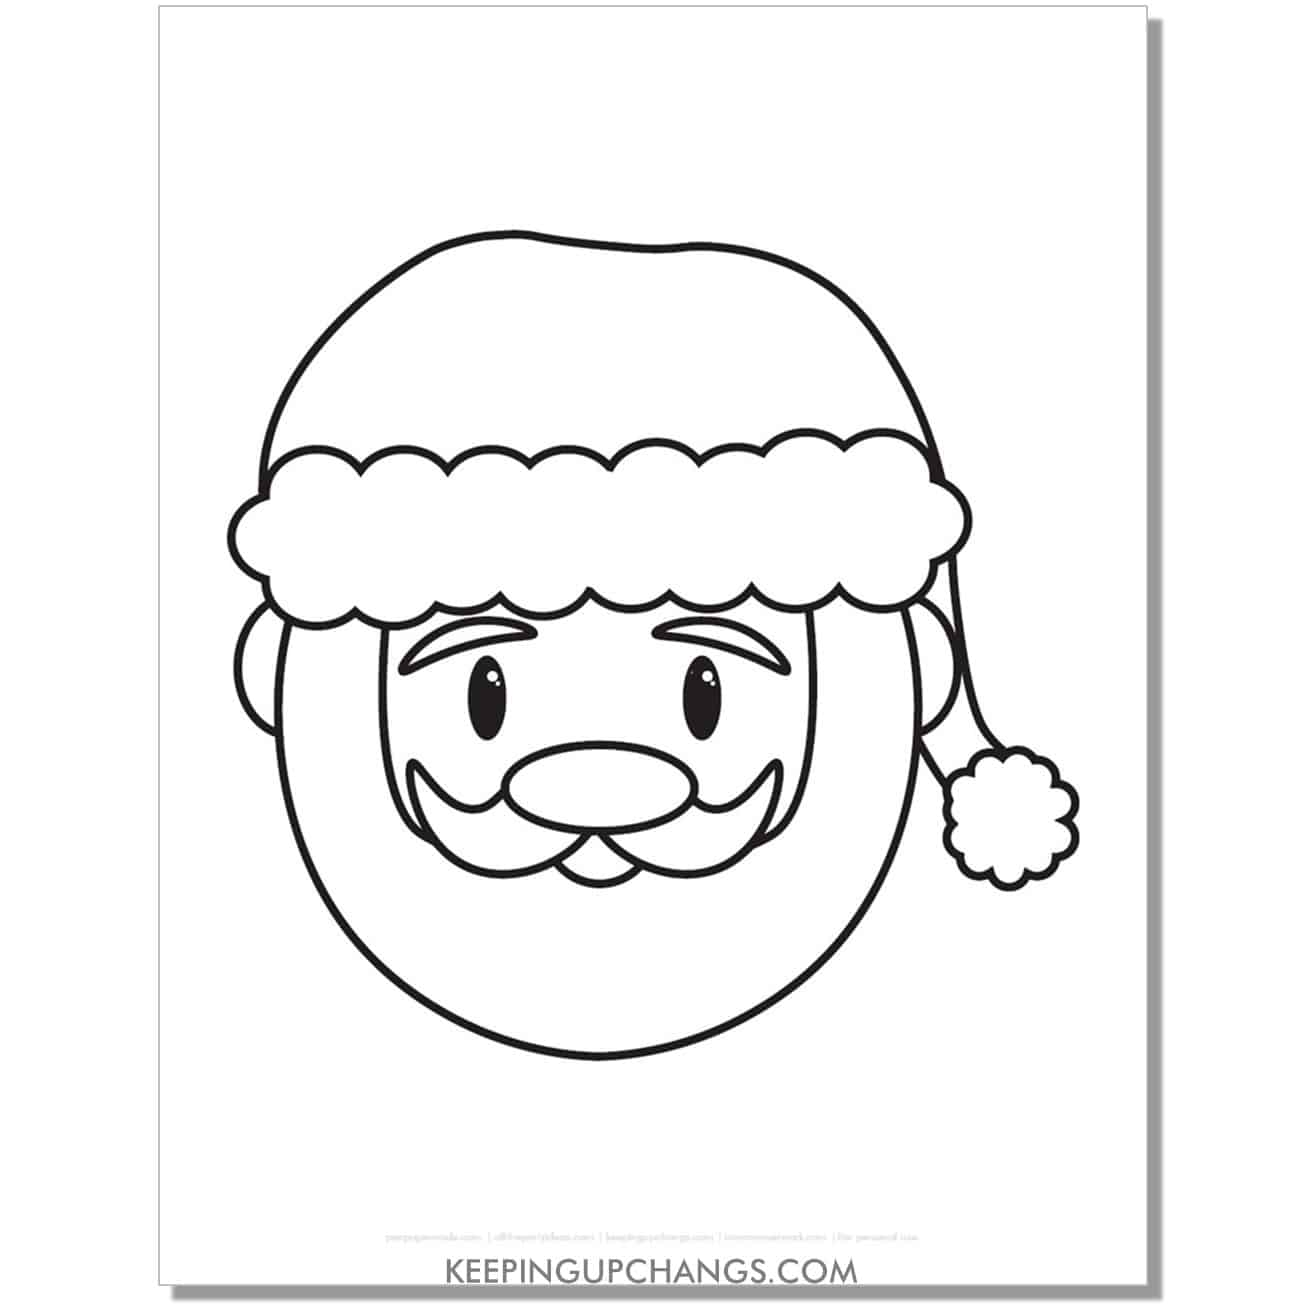 free cute santa face outline, template, cut out, coloring page.